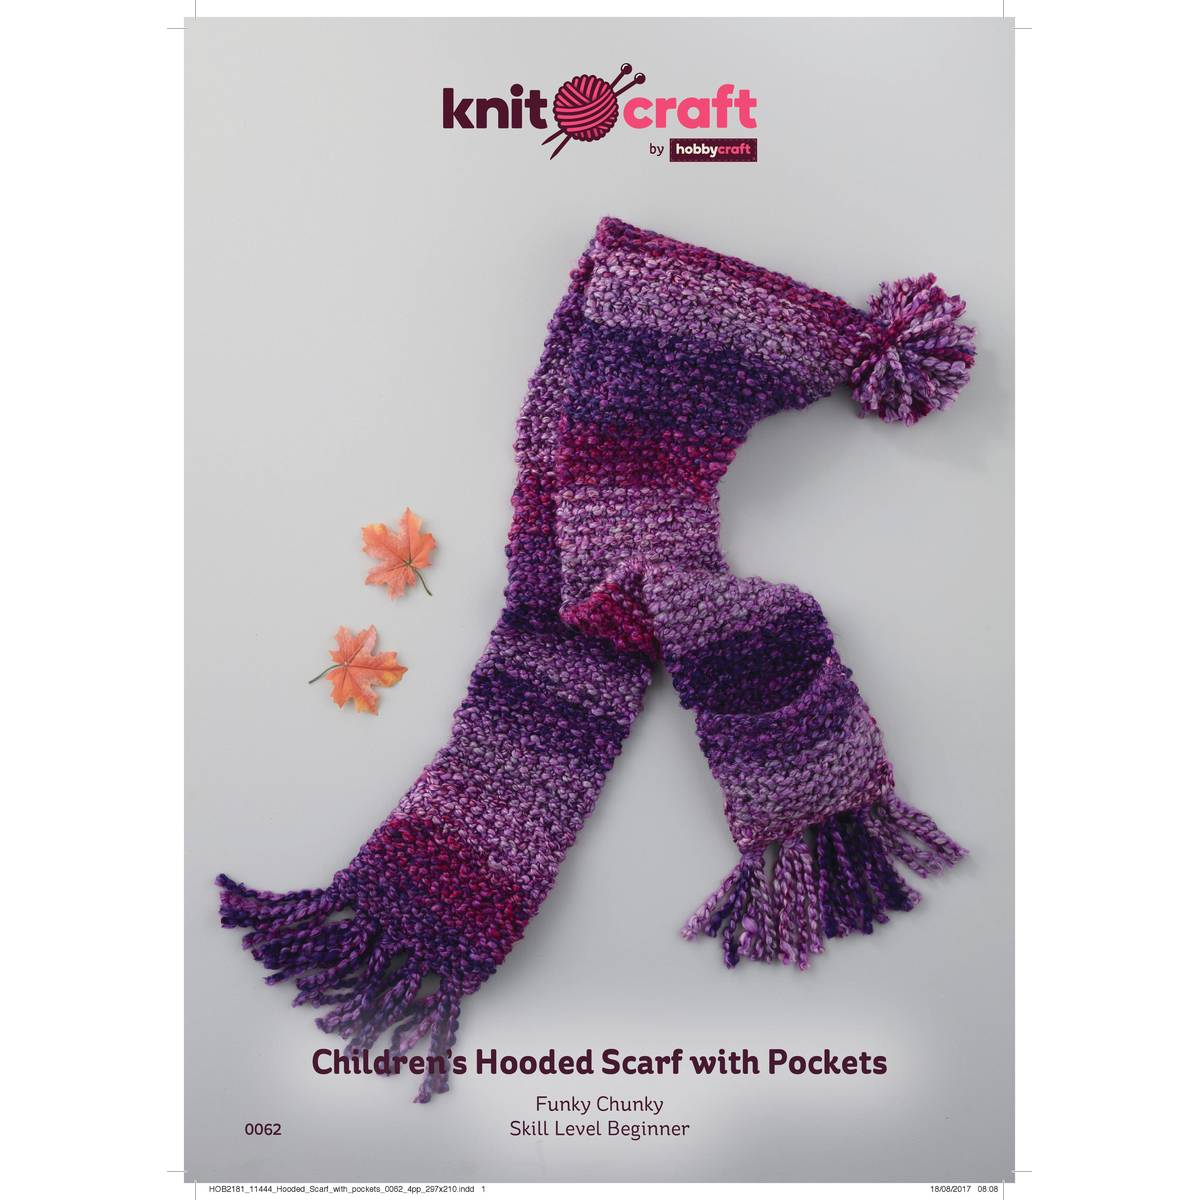 Knitted Hooded Scarf With Pockets Pattern Knitcraft Childrens Hooded Scarf With Pockets Digital Pattern 0062